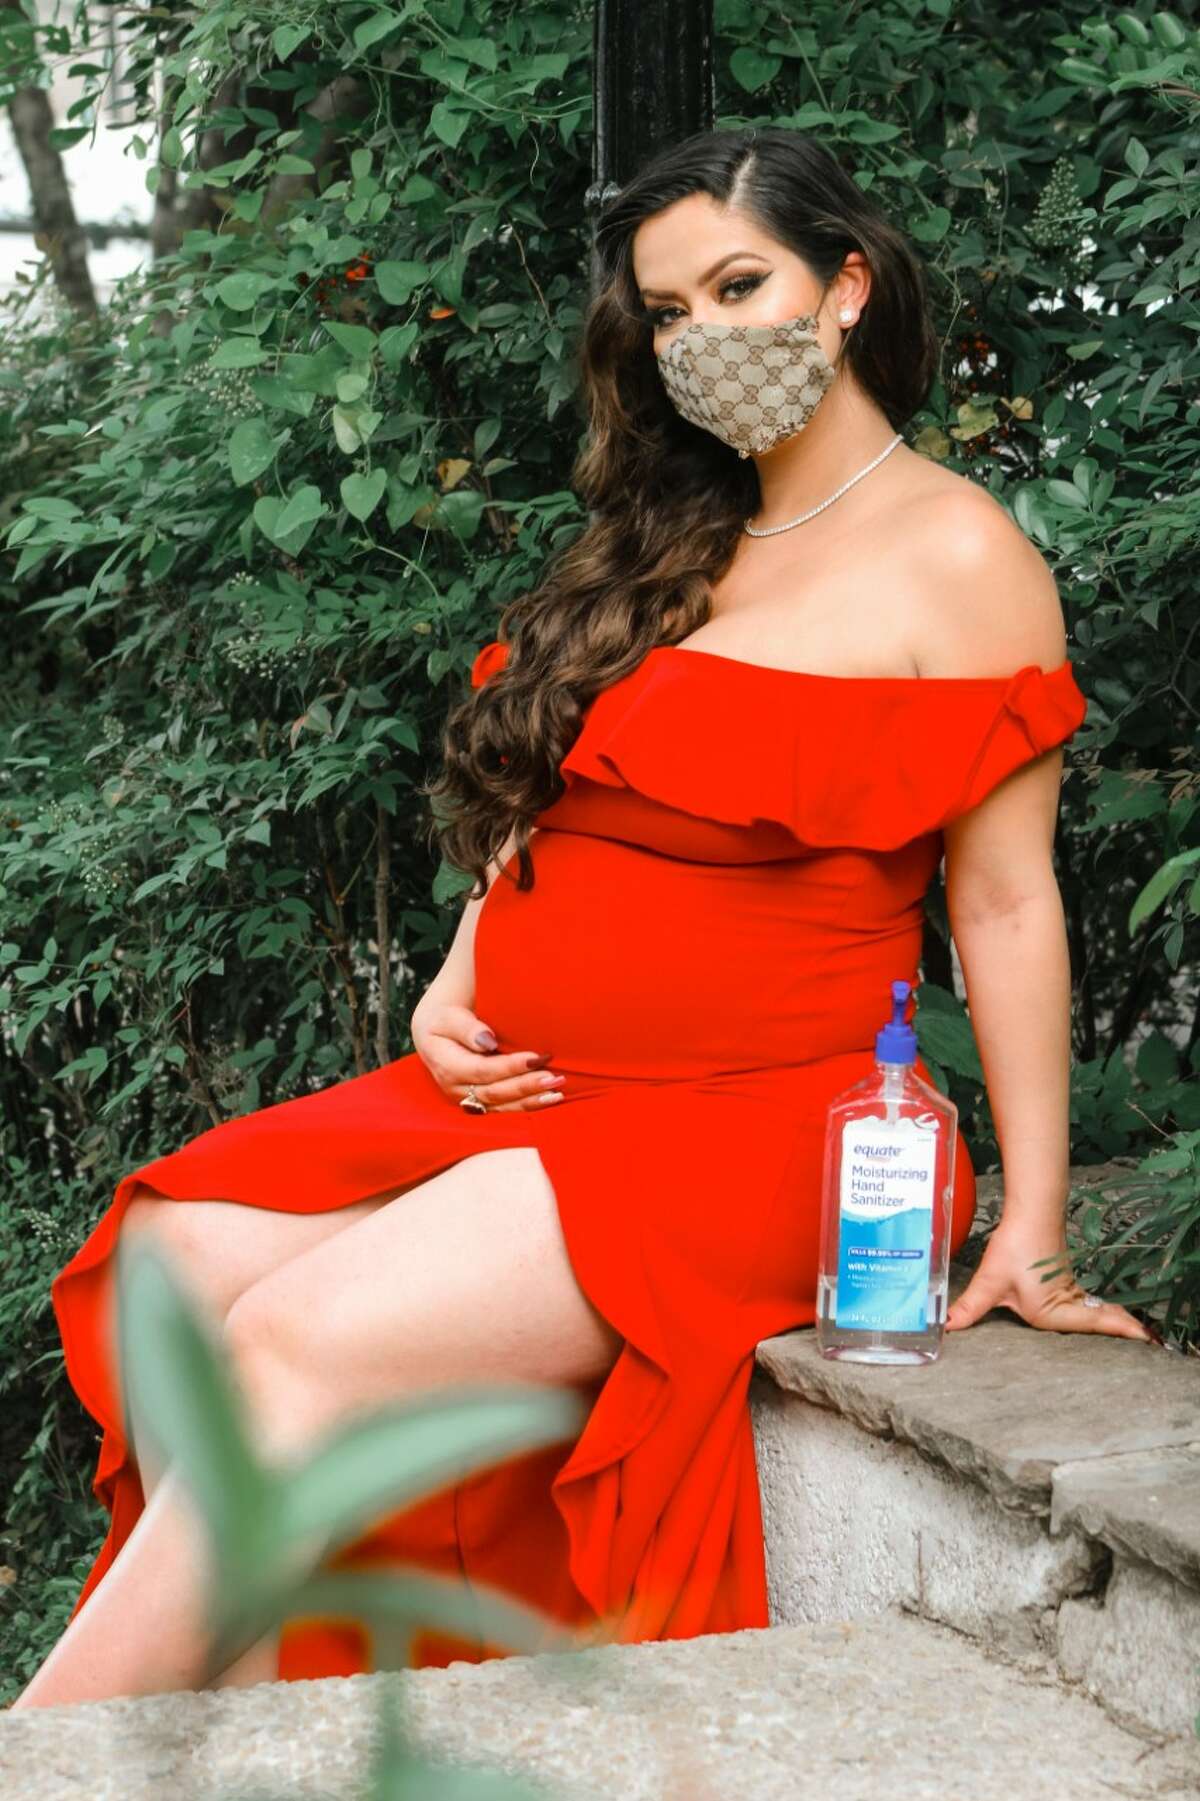 Longoria said she wore the dress she was going to wear at her baby shower in the photoshoot as well as a mask that was designed by her niece Marilou Delatorre.